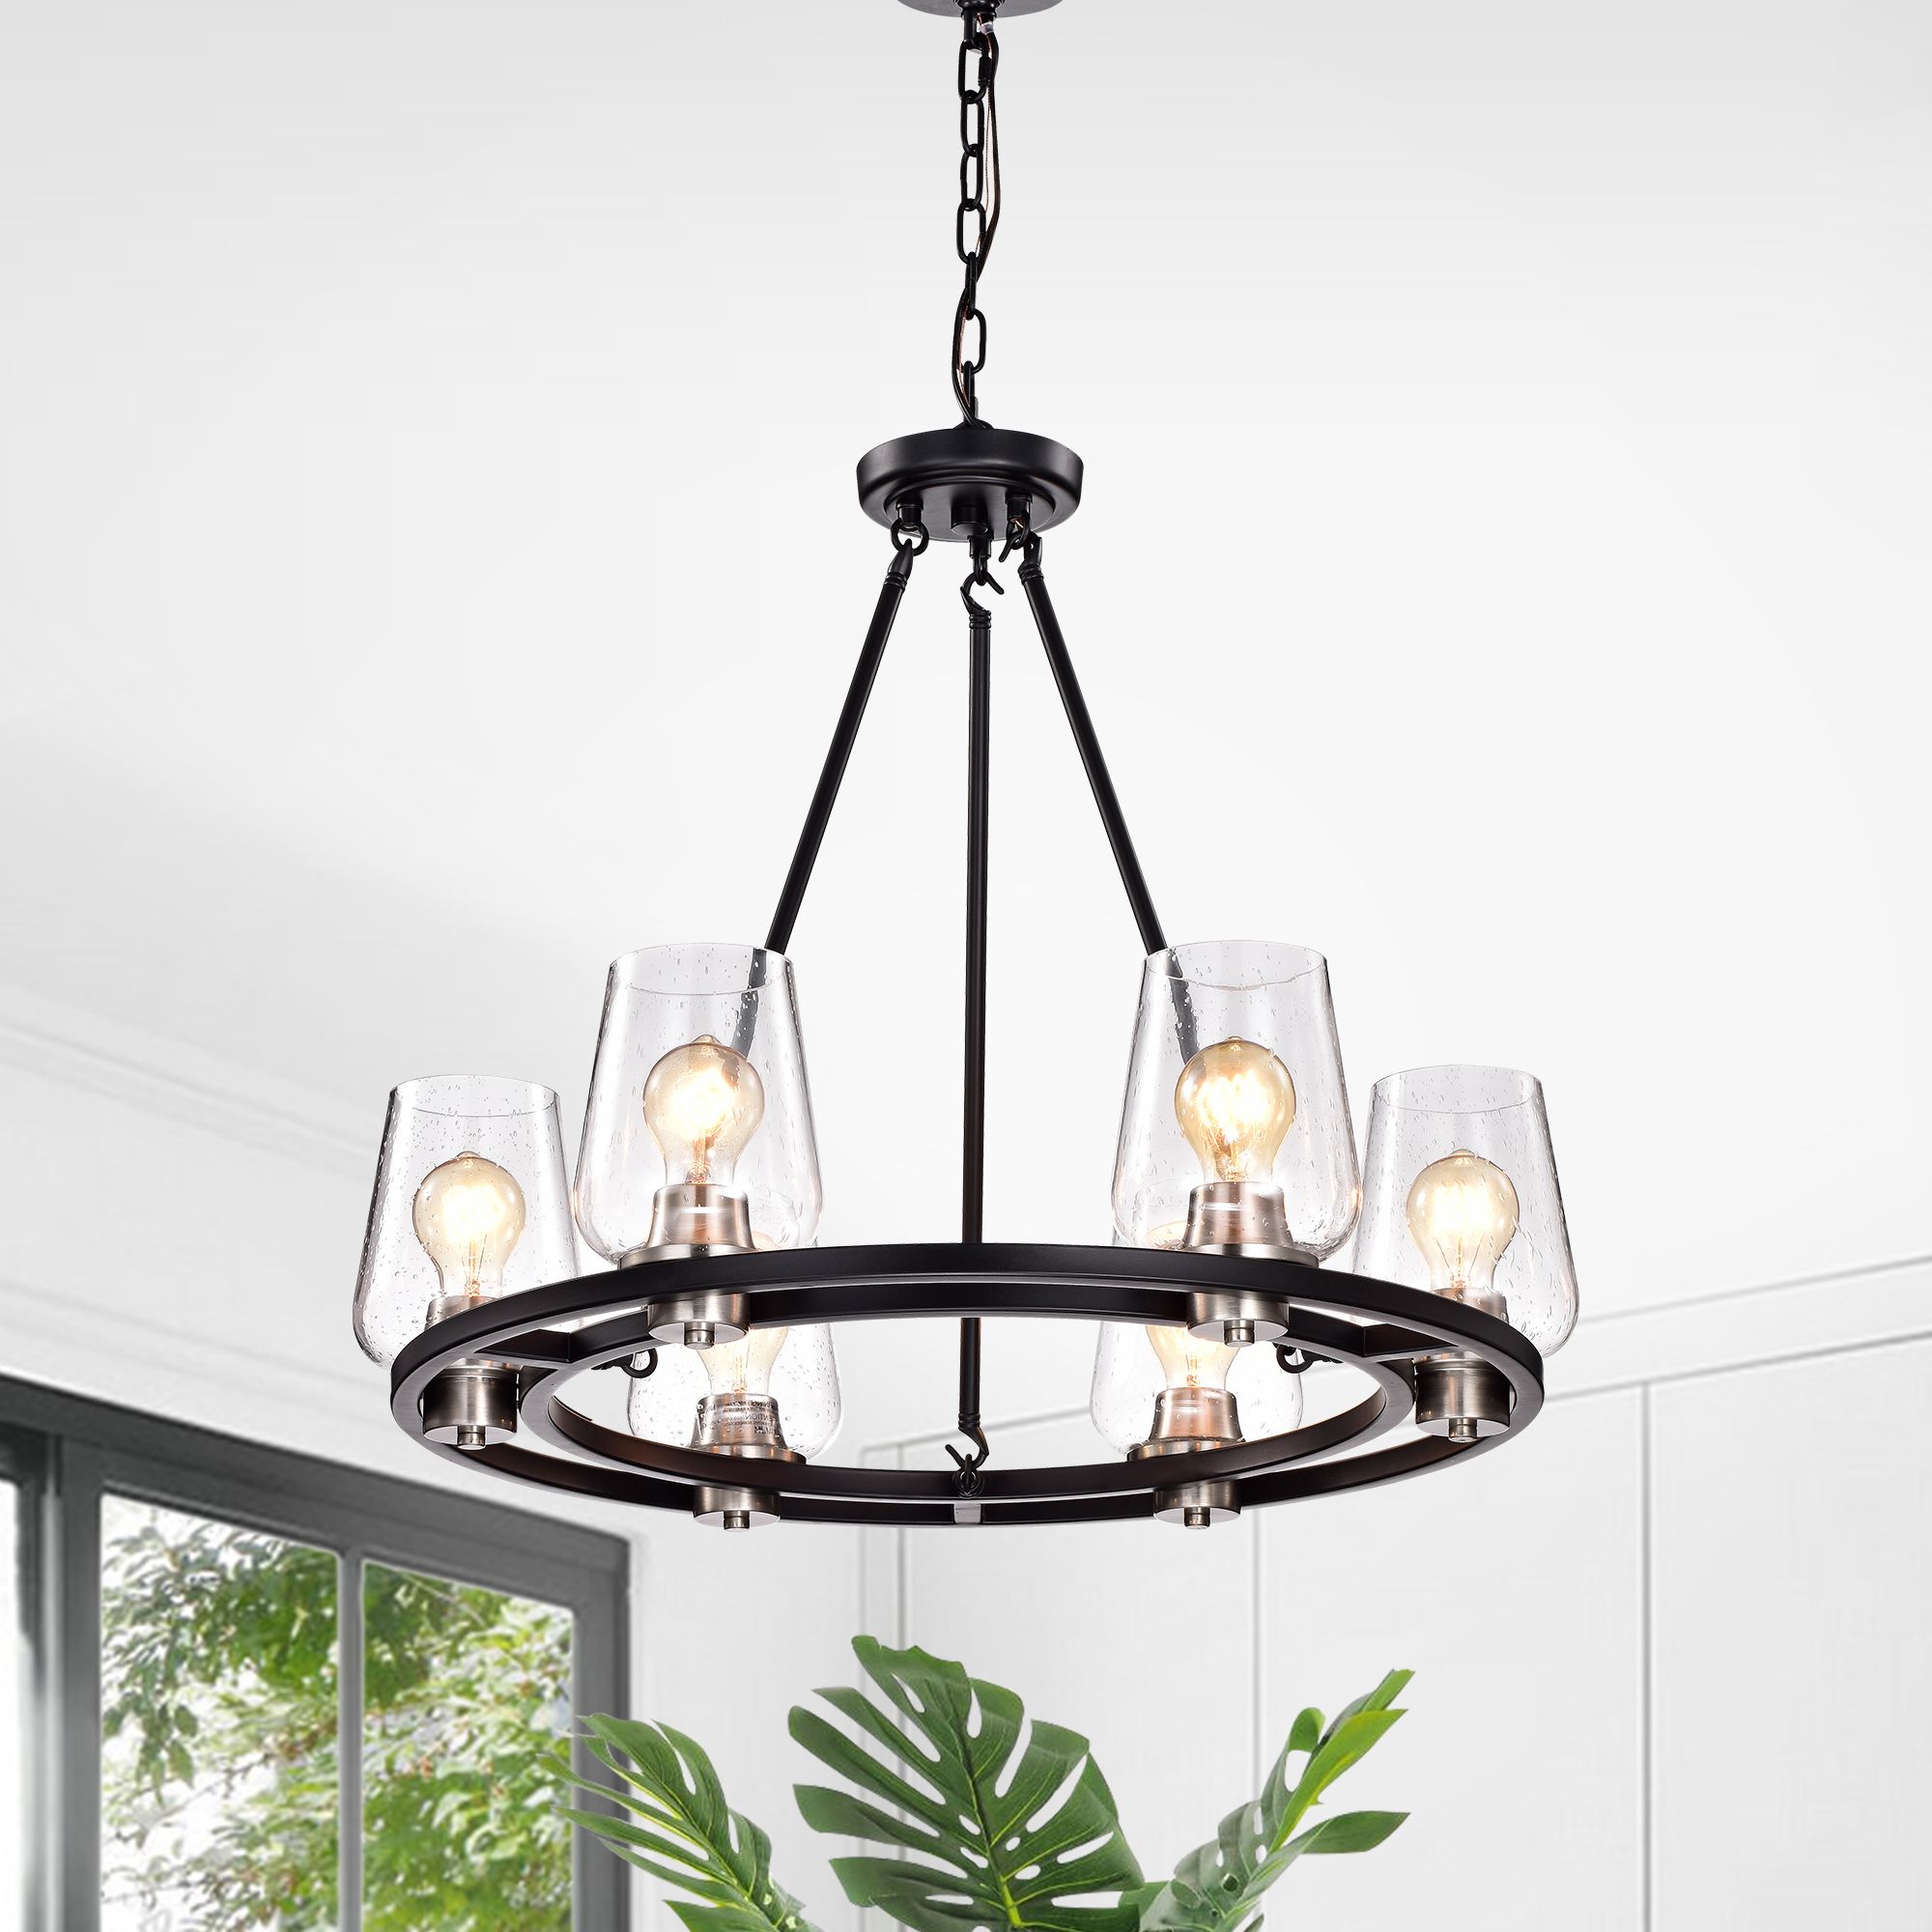 Famous Six Light Chandeliers With Regard To 6 Light Black And Brushed Nickel Circular Chandelier With (View 2 of 20)